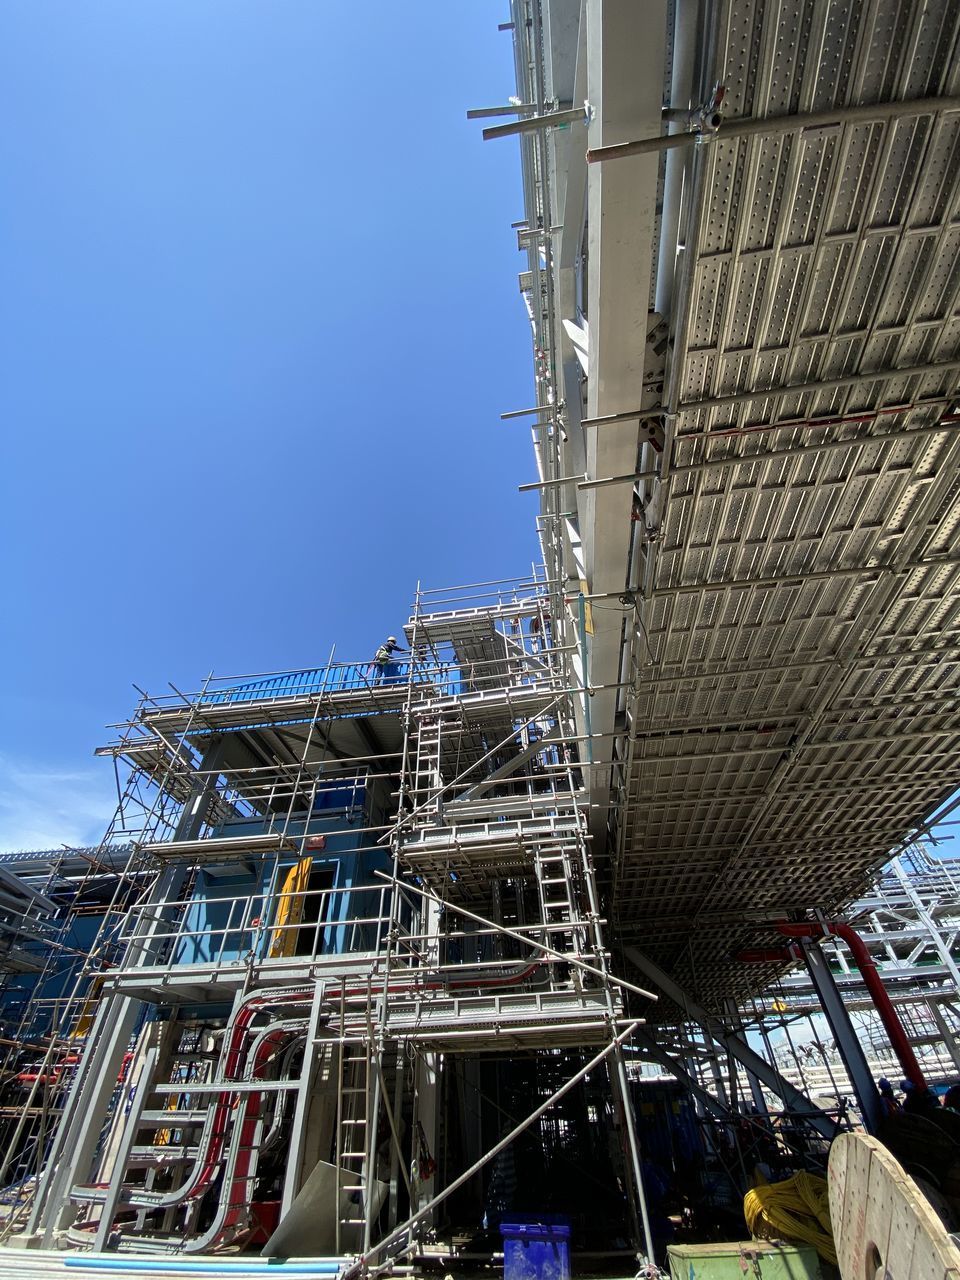 LOW ANGLE VIEW OF BUILDING UNDER CONSTRUCTION